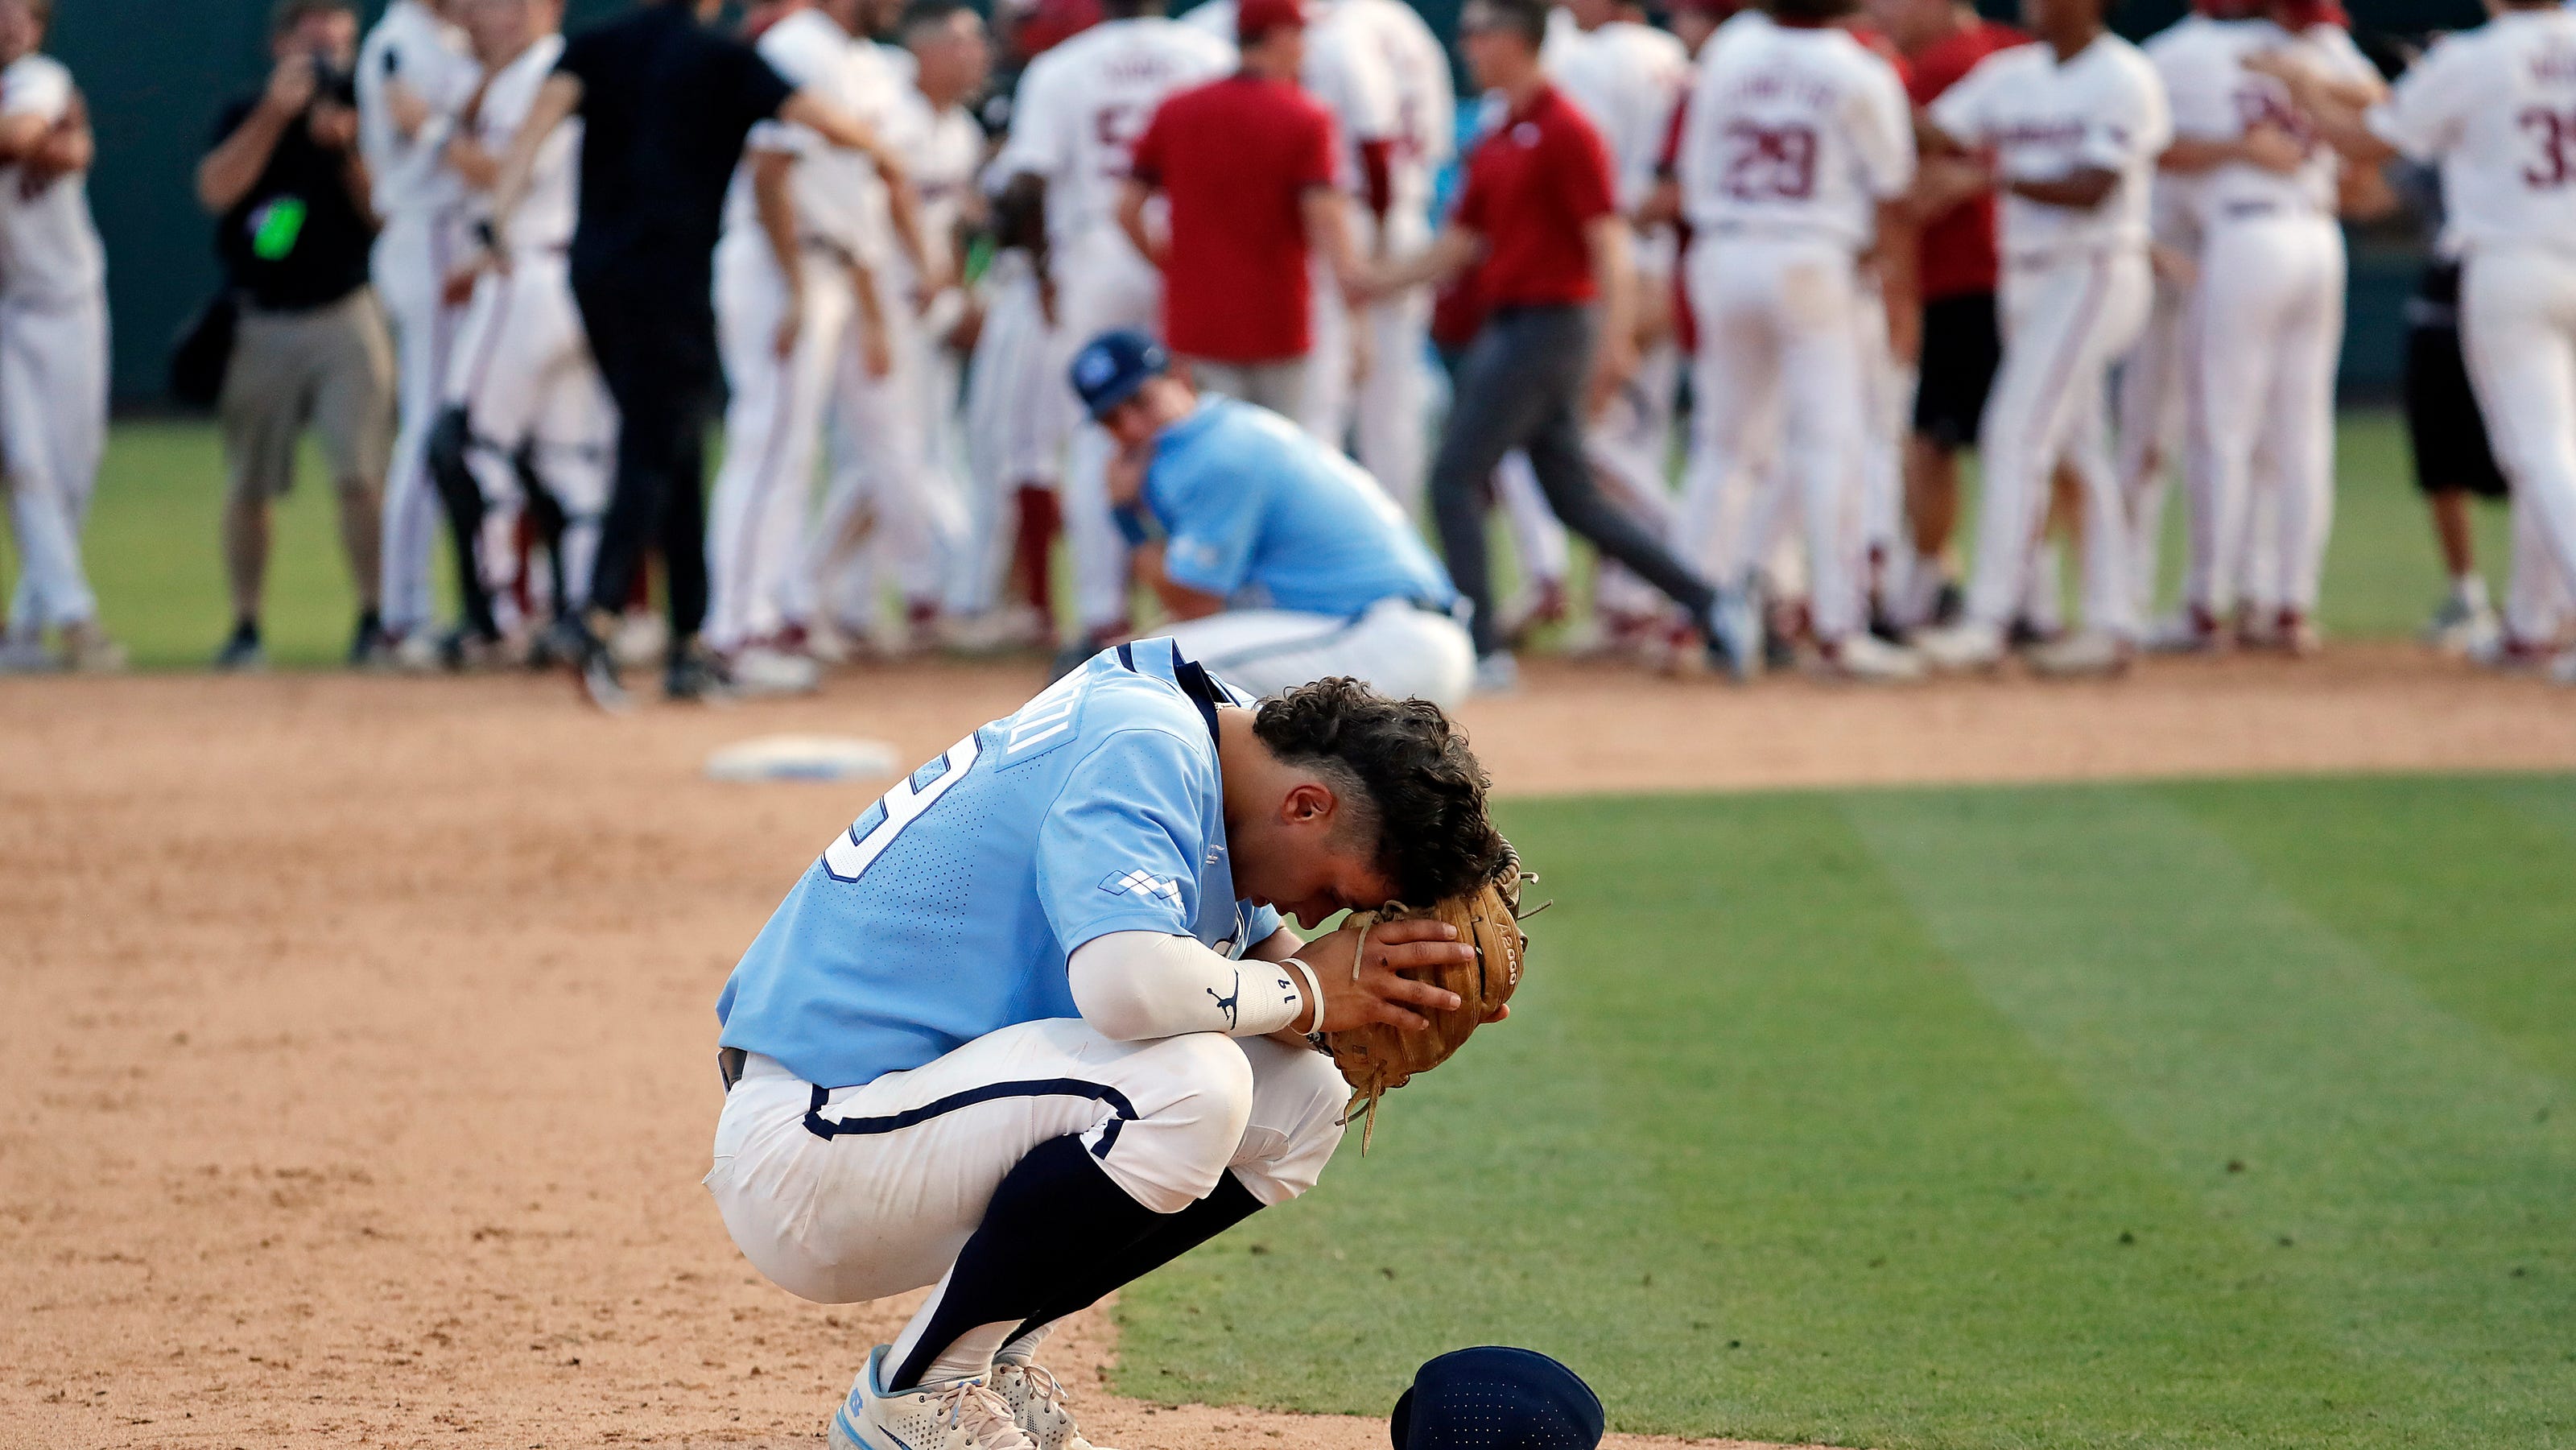 ‘It’ll rip your heart out’: Season-ending emotion hits UNC baseball in super regional loss